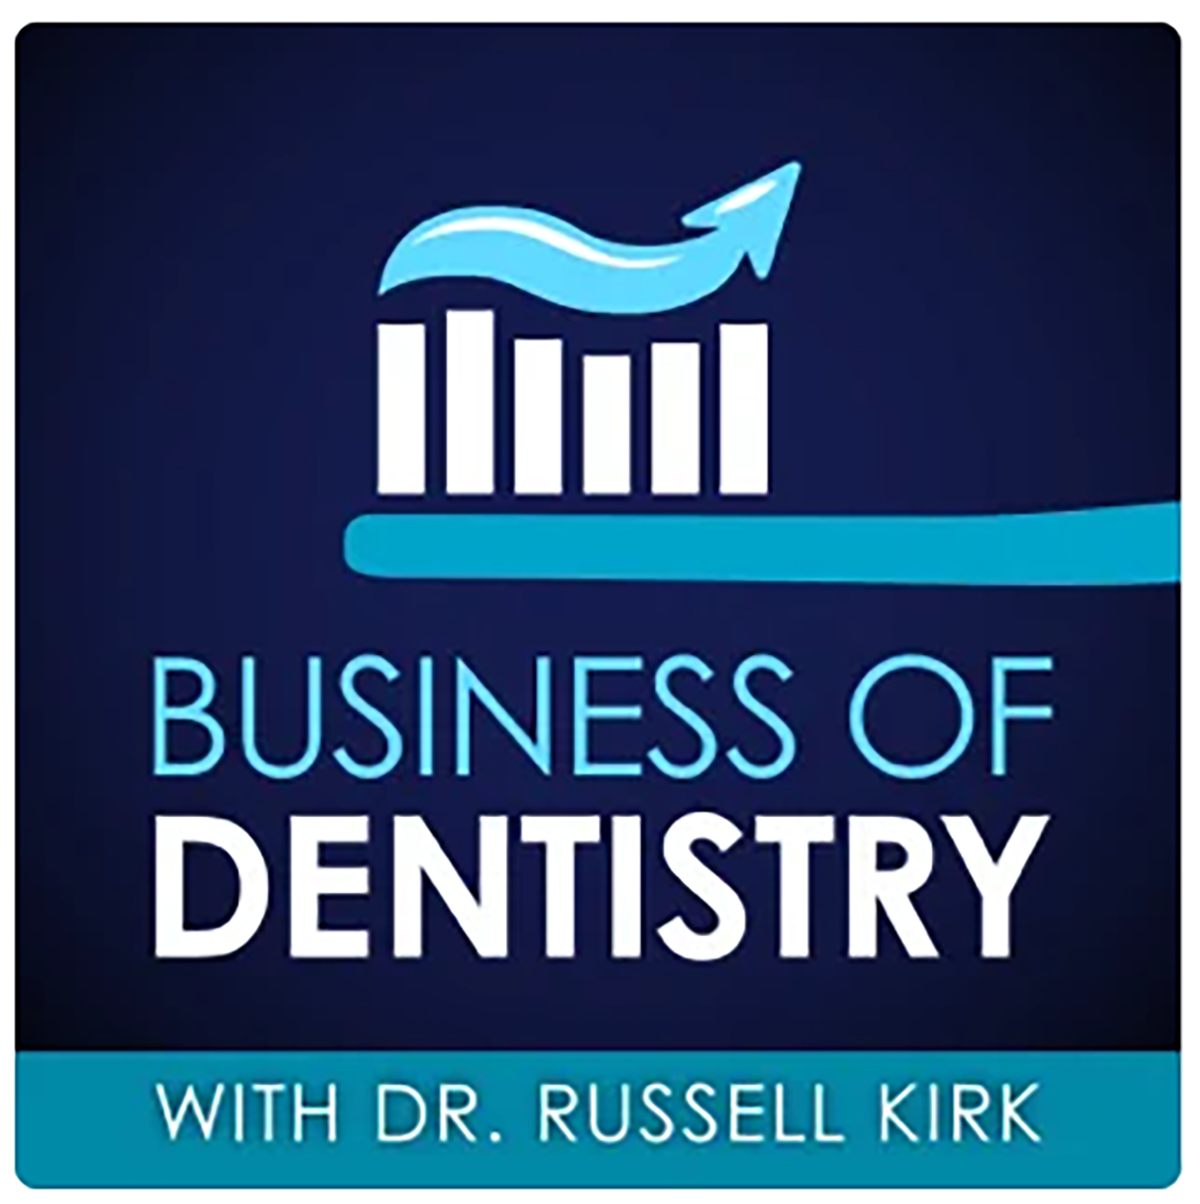 Business of Dentistry With Dr. Russell Kirk podcast logo